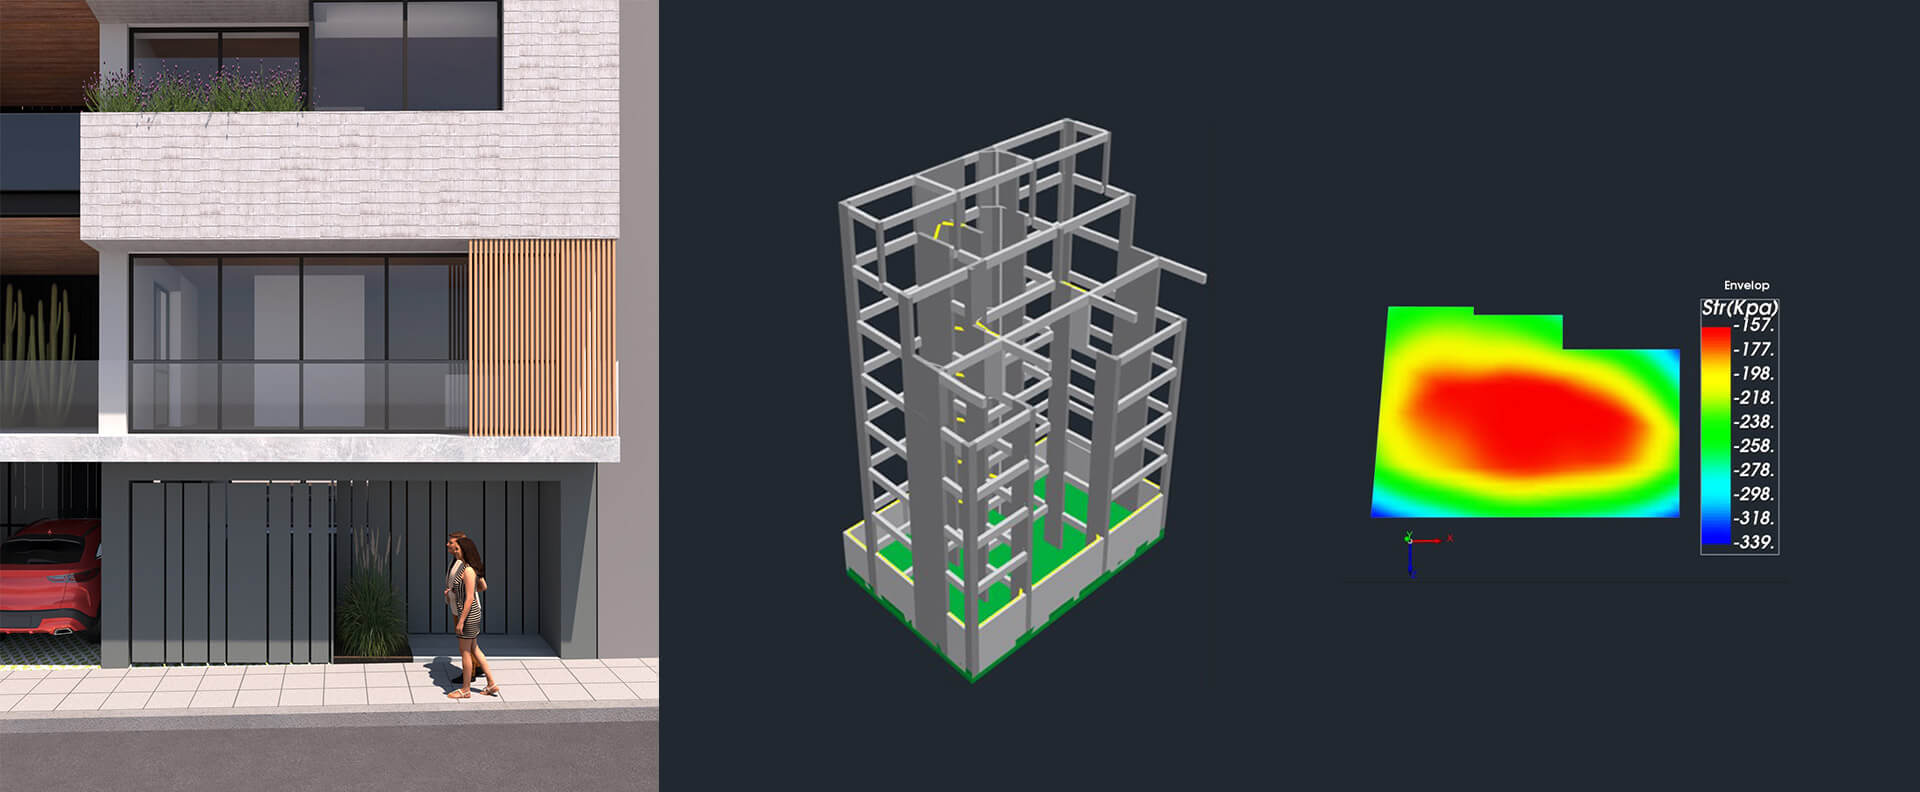 Structural Study of multi-story building for Permit